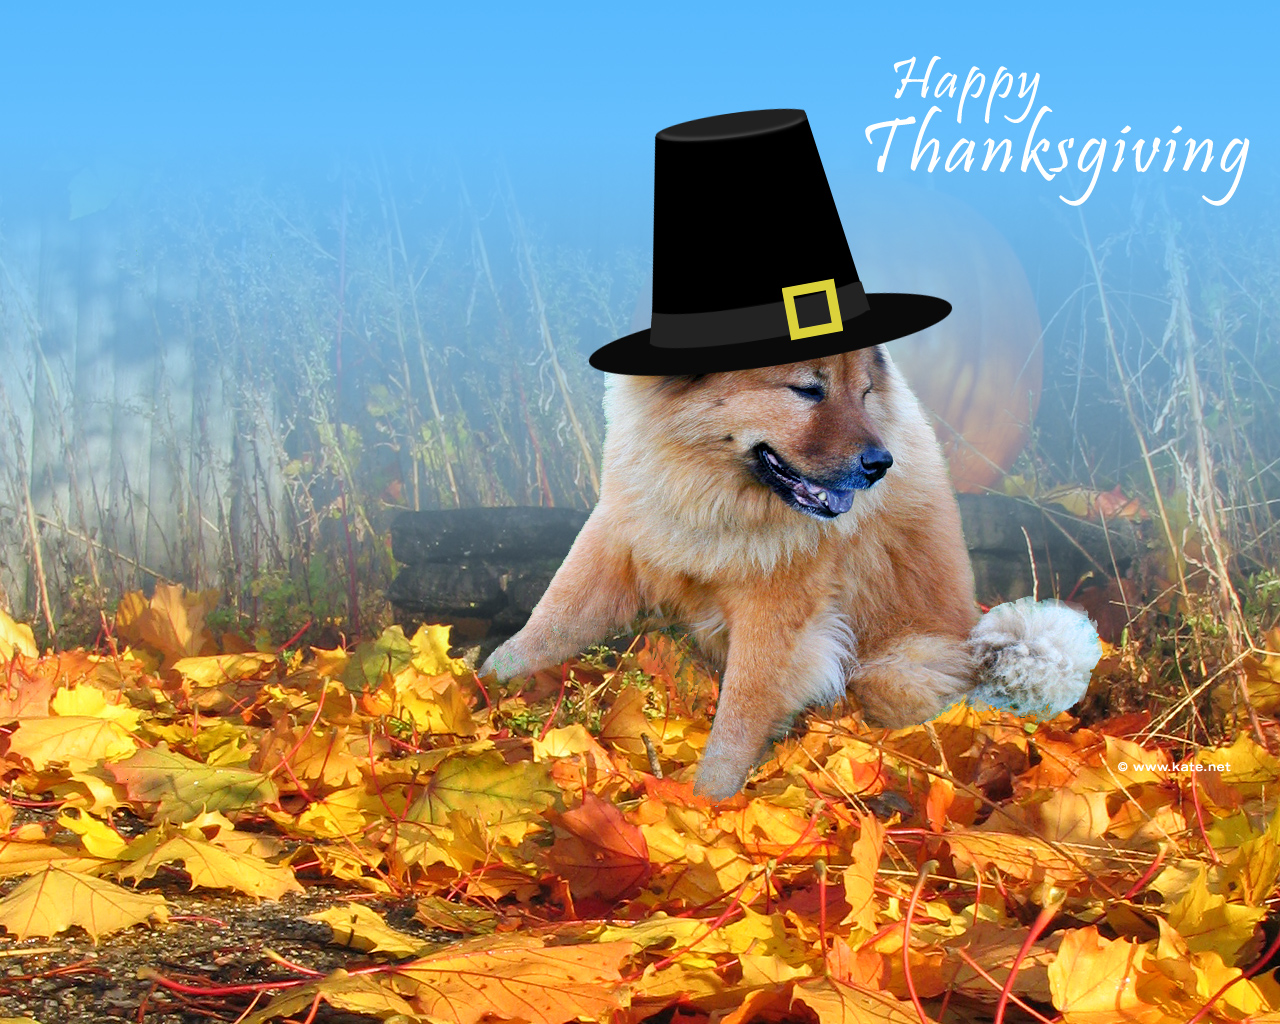 Thanksgiving Wallpapers on Kate.net - Page 1